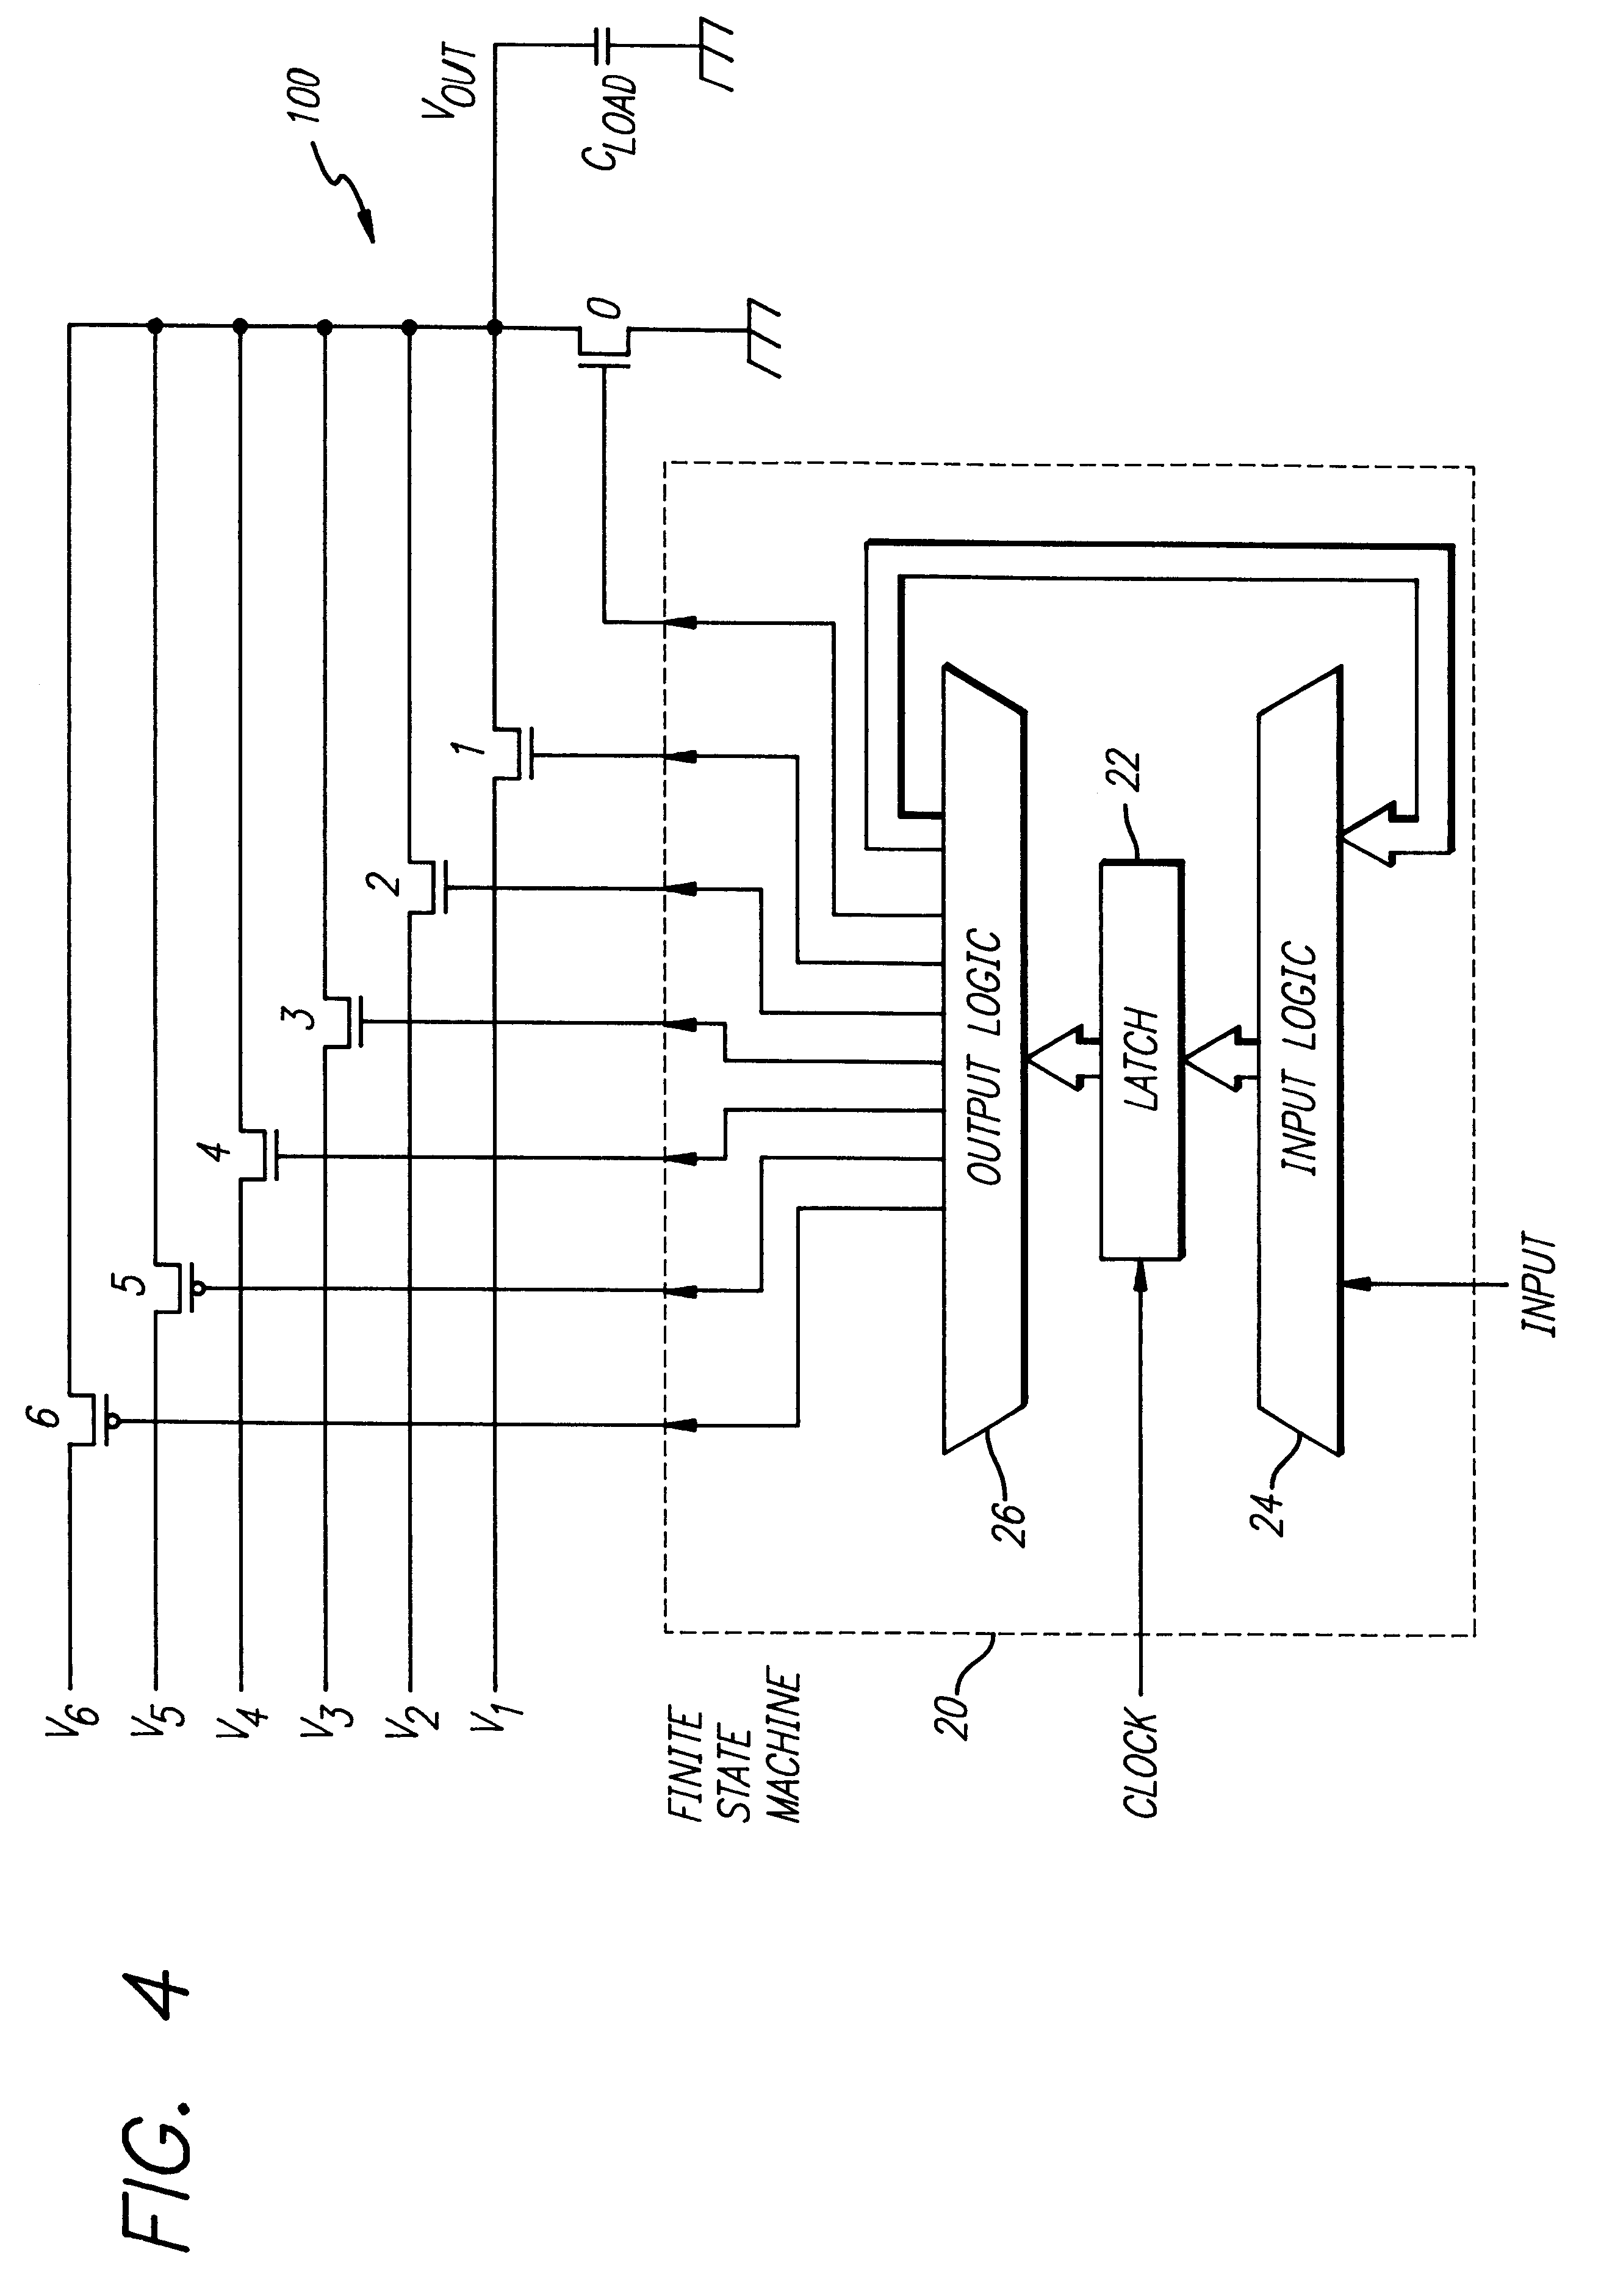 System and method for power-efficient charging and discharging of a capacitive load from a single source